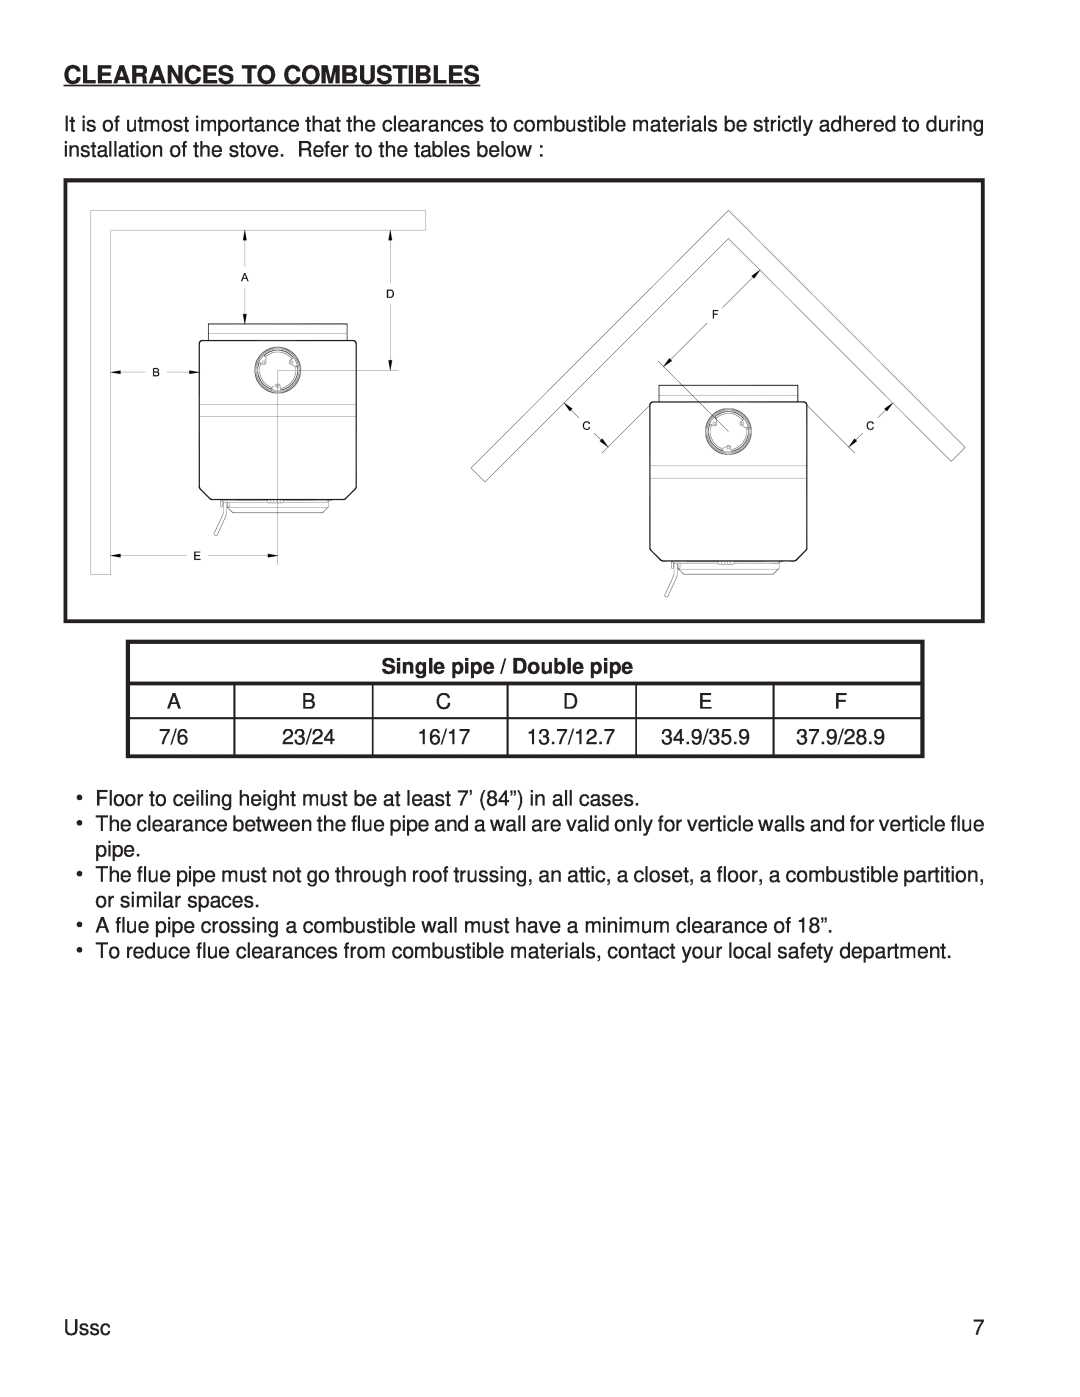 United States Stove 2015 instruction manual Clearances To Combustibles, Single pipe / Double pipe 